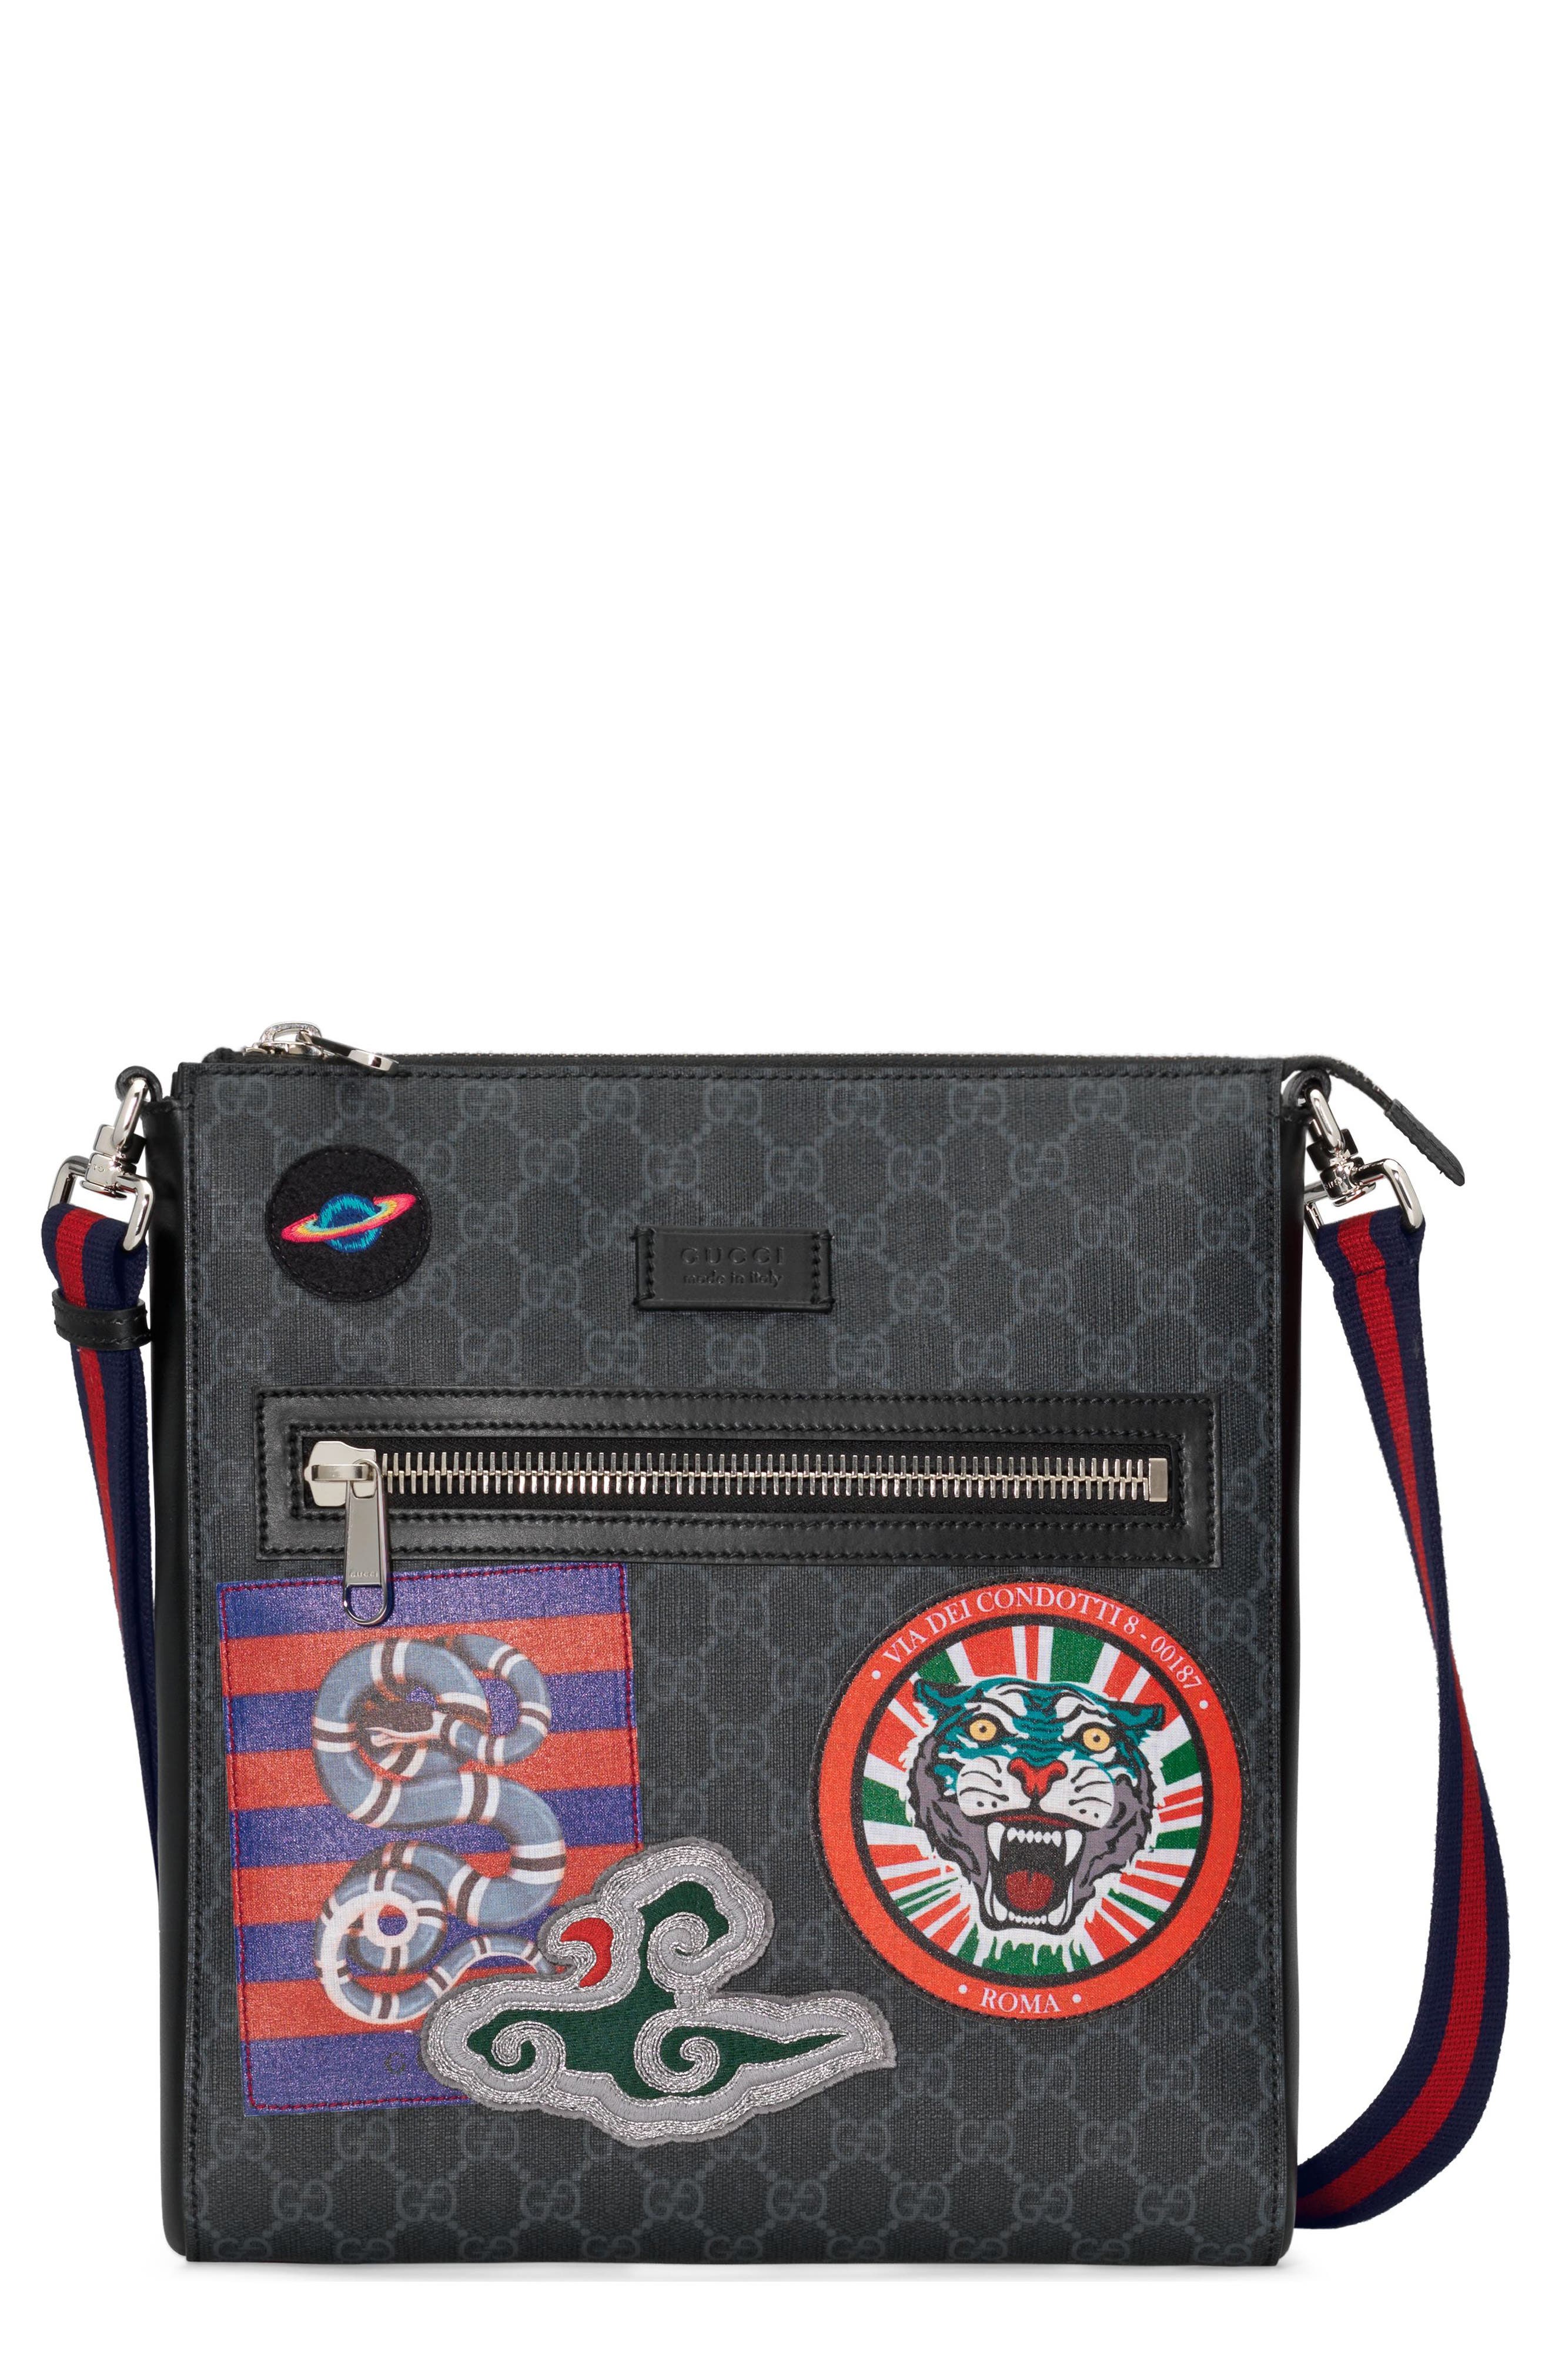 gucci messenger bag with patches